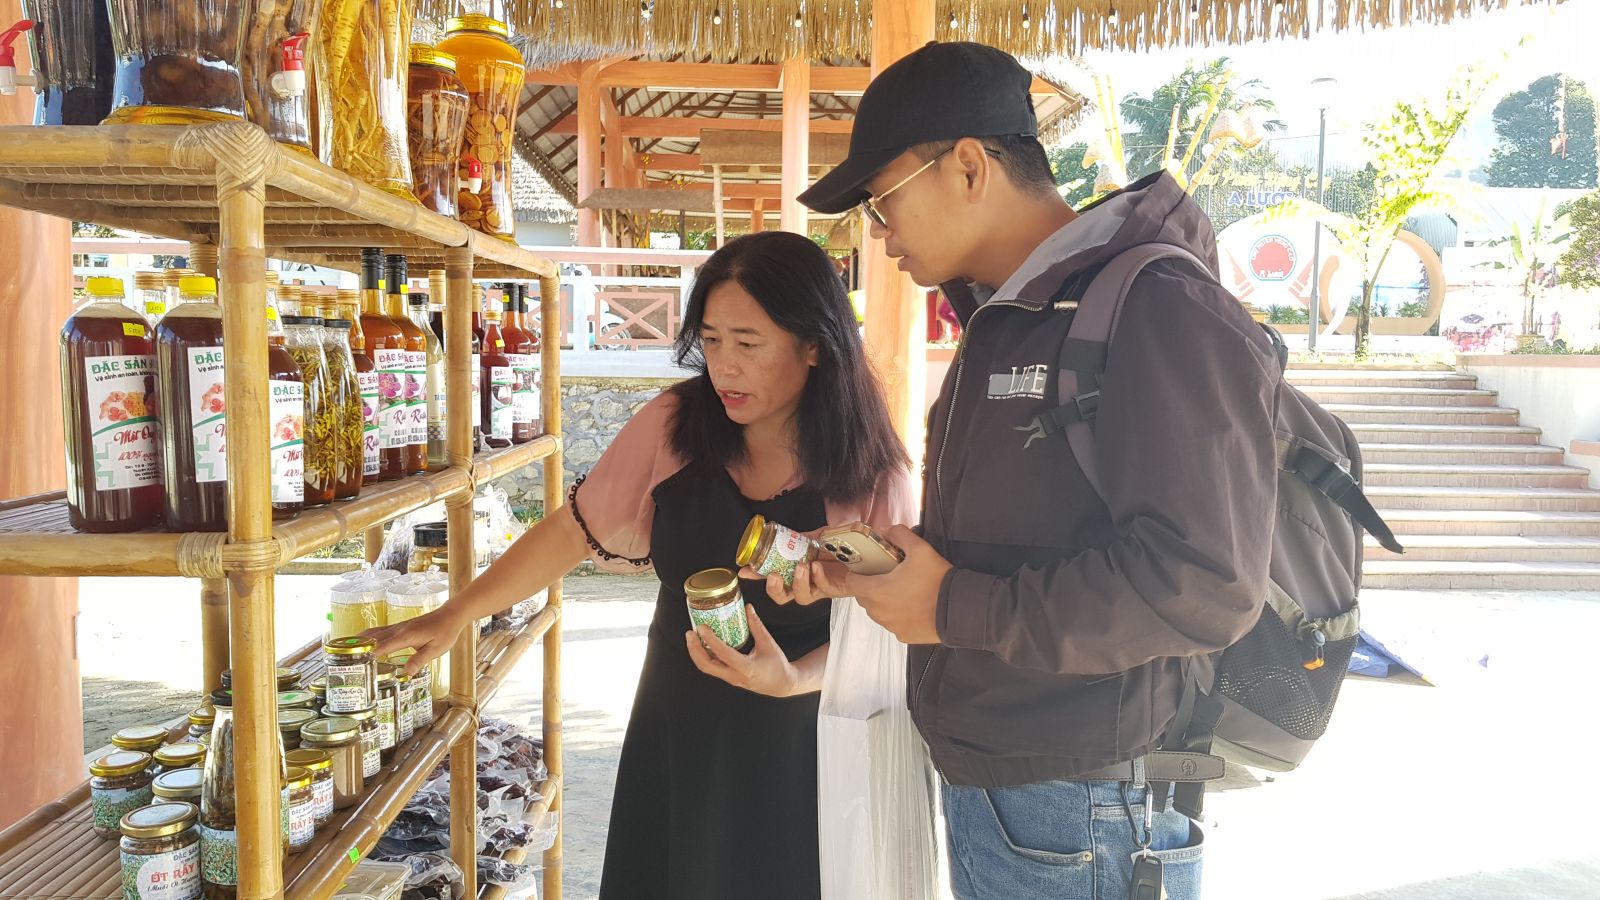 Buying A Luoi specialty salt at A Luoi market stall